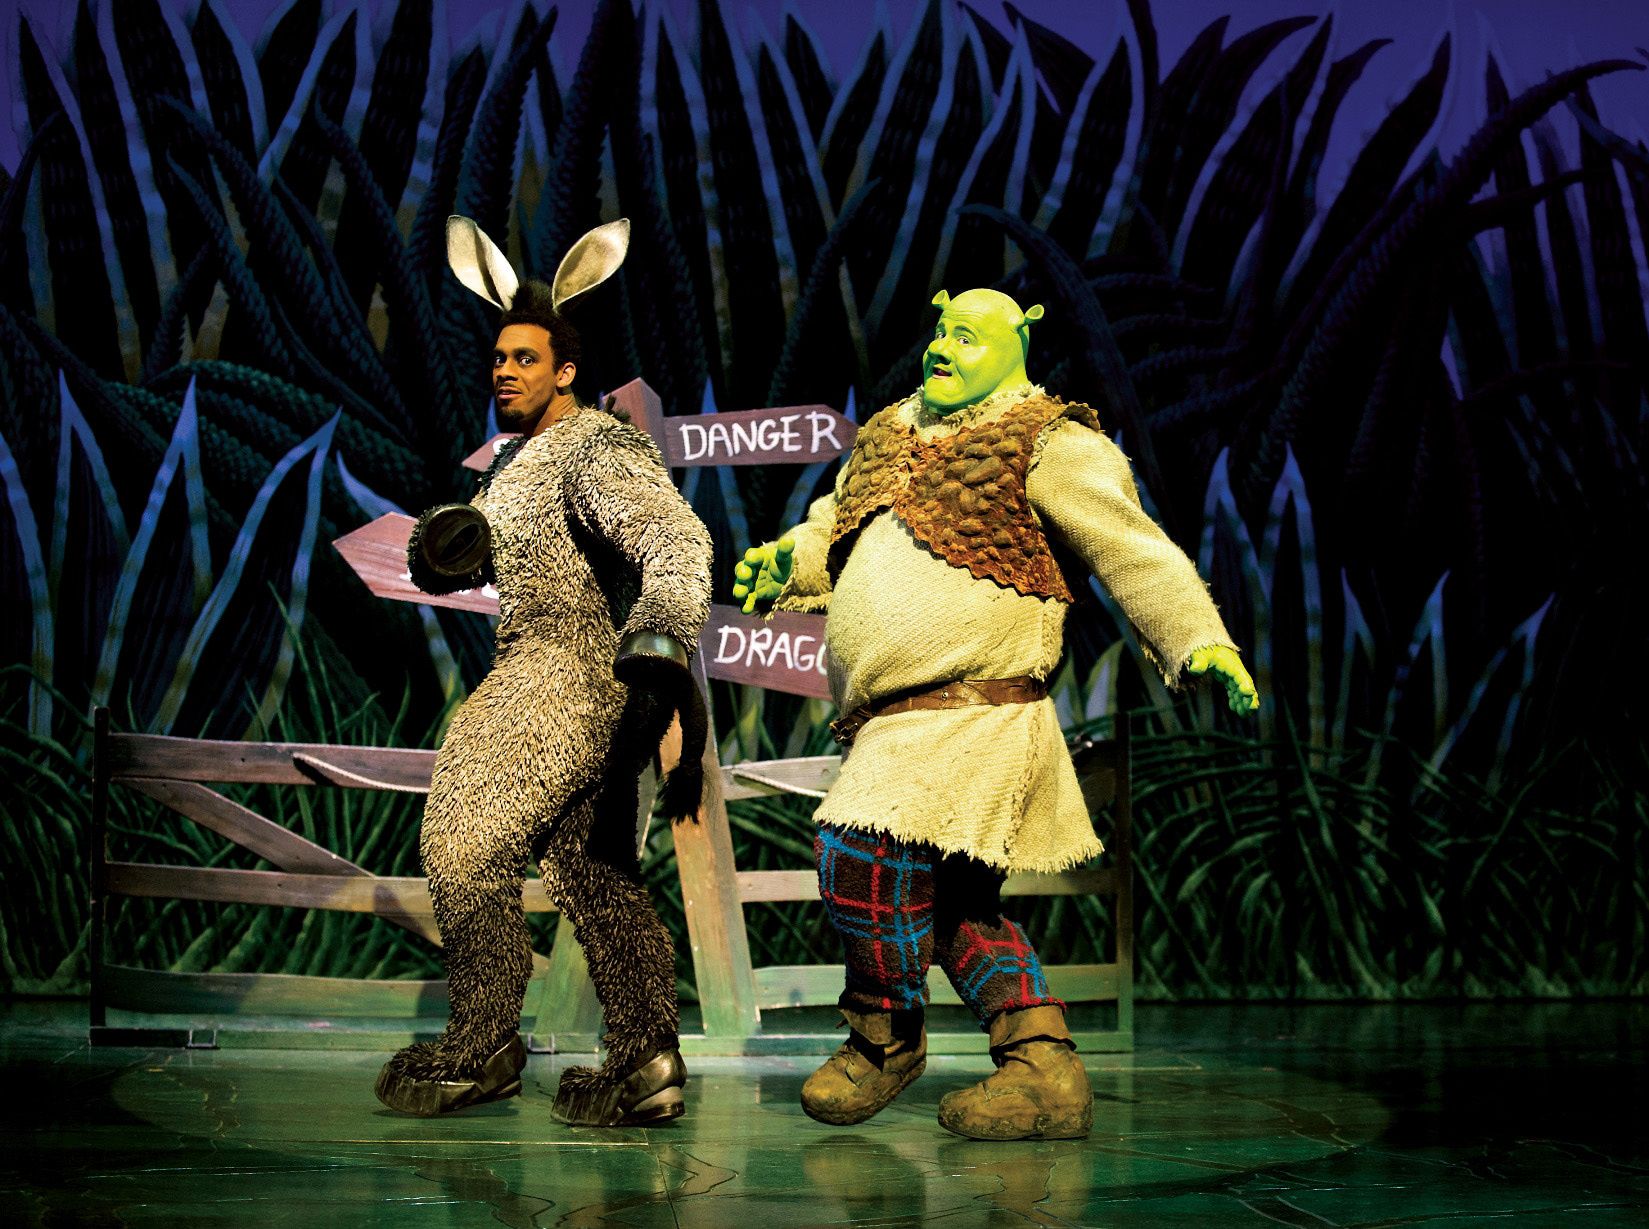 Donkey and Dean Chisnall in Shrek the Musical Cartoon Wallpaper